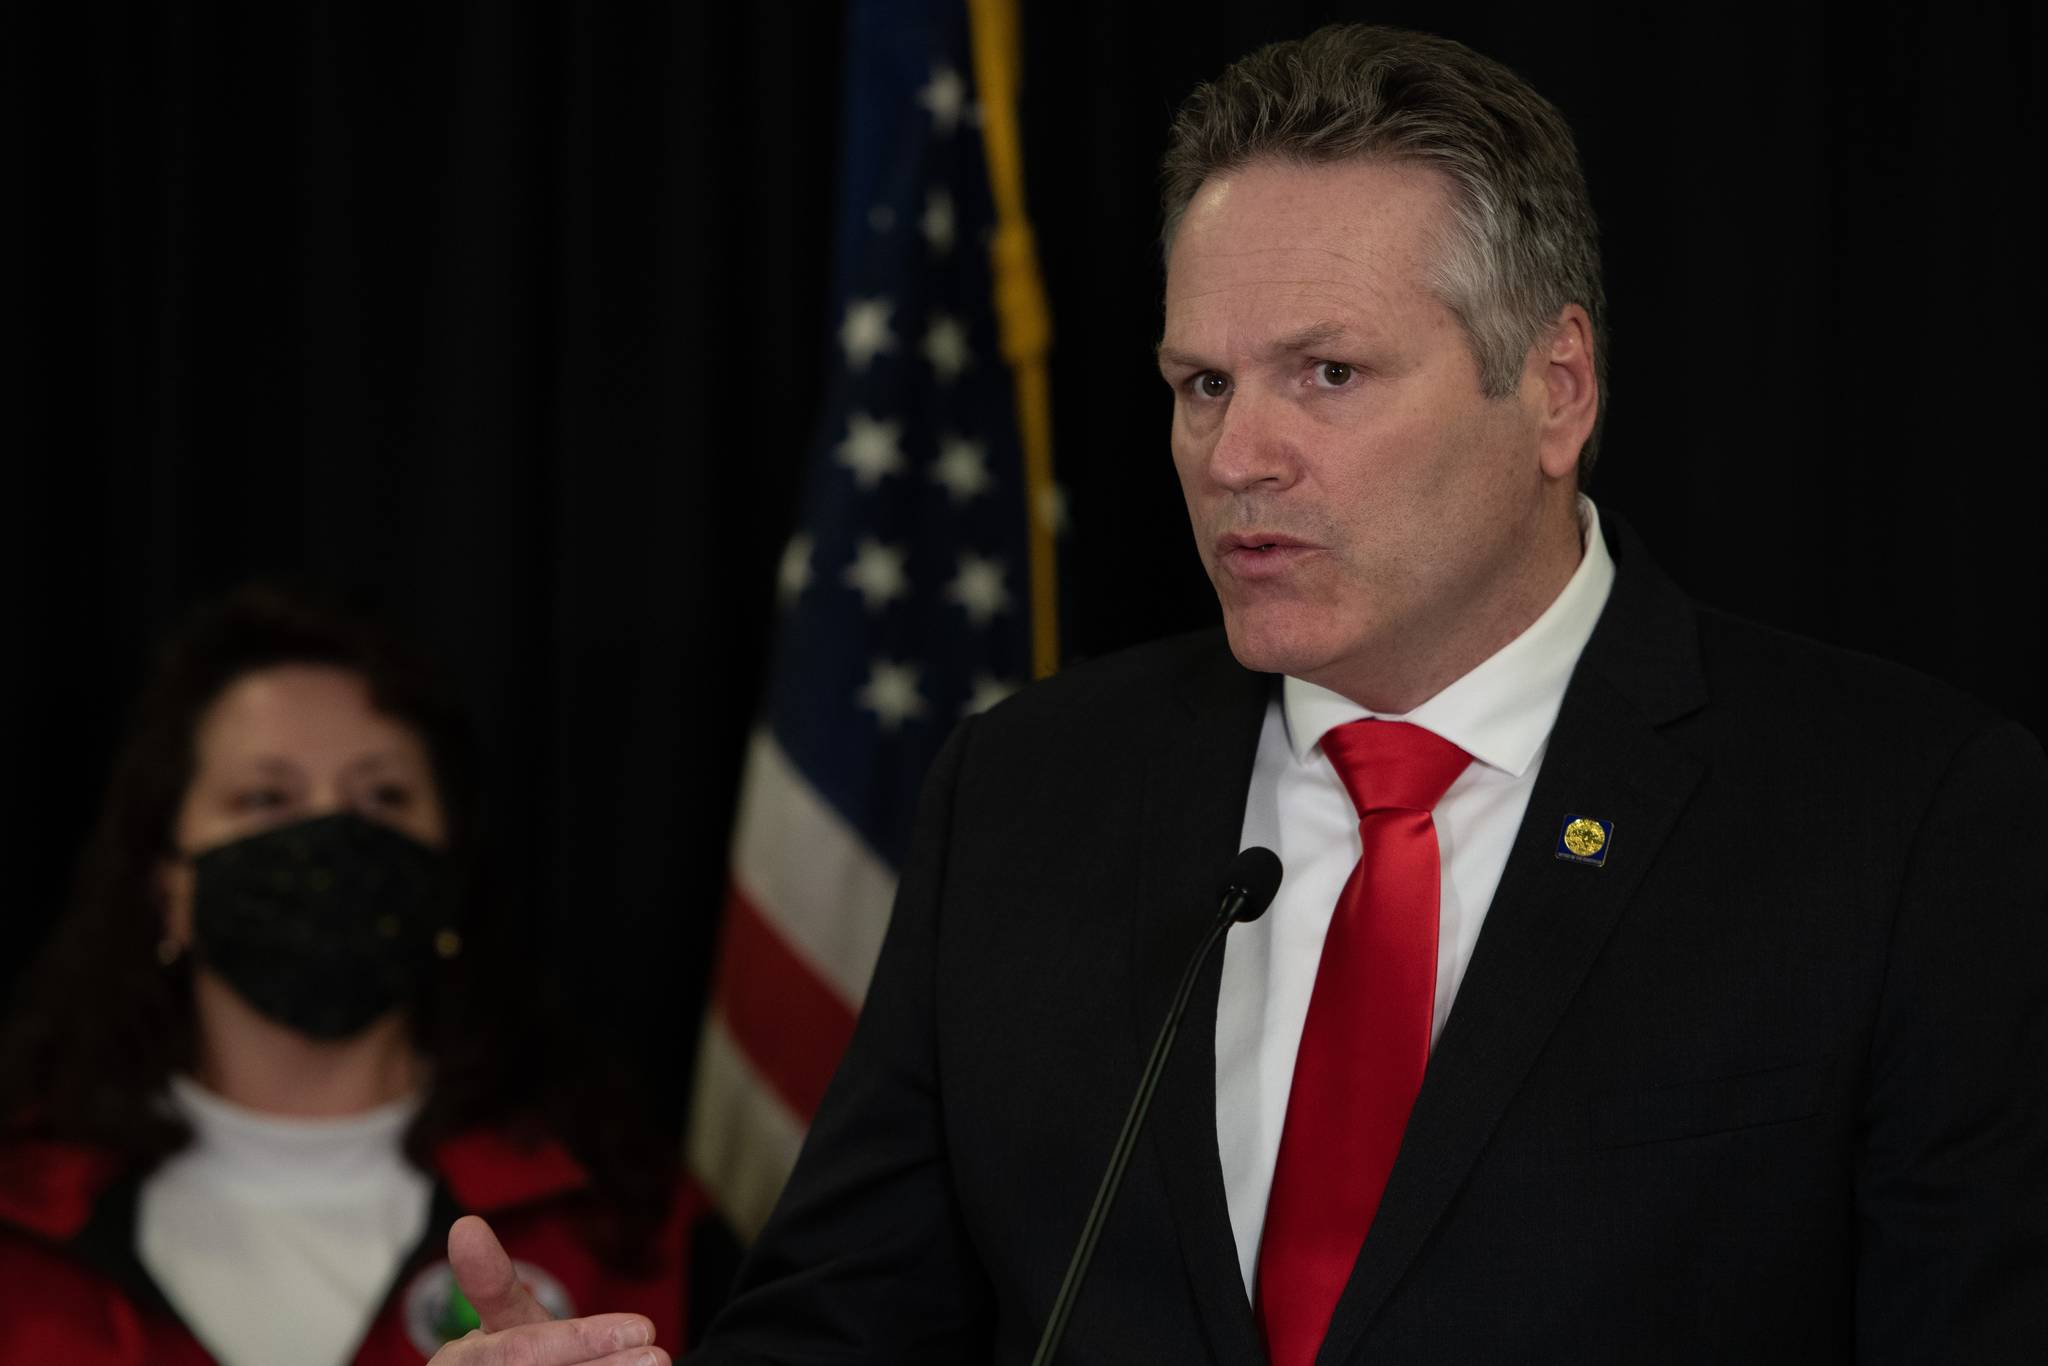 Gov. Mike Dunleavy speaks at a news conference in Anchorage on Friday, March 26, 2021, to announce the state’s intention to begin management of over 800,000 miles of submerged lands as affirmed in a 2019 U.S. Supreme Court decision. (Courtesy photo / Office of Gov. Mike Dunleavy)